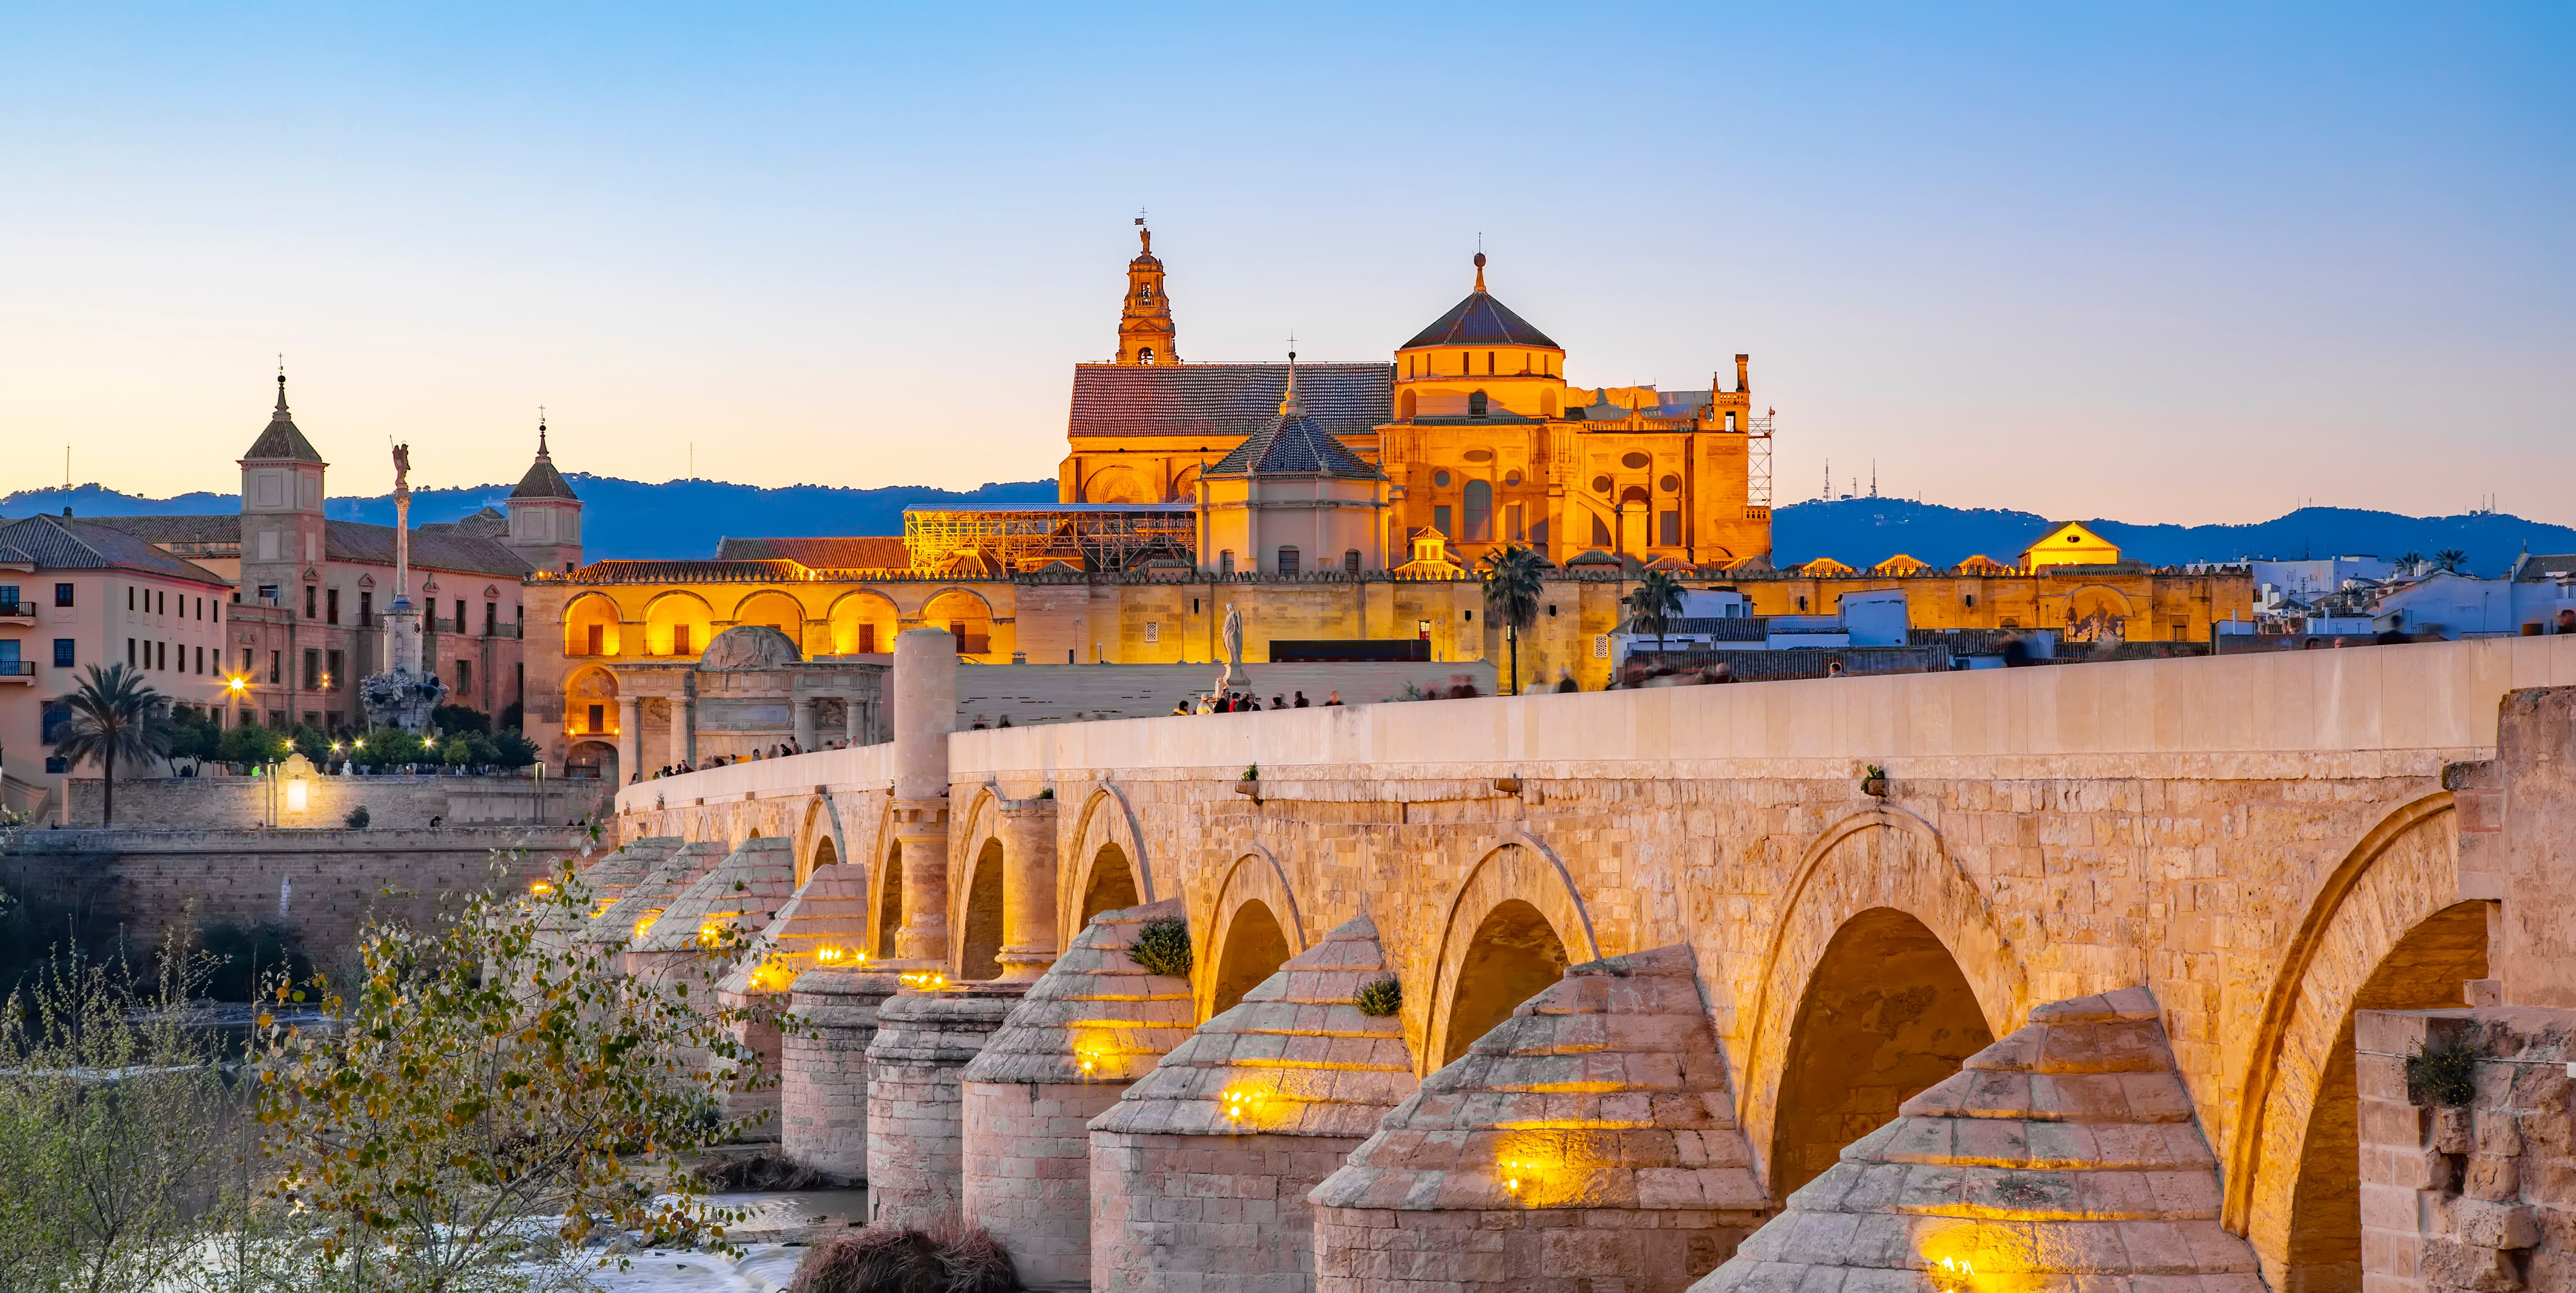 Famous Roman Bridge in UNESCO Cordoba is a must-see when traveling Europe